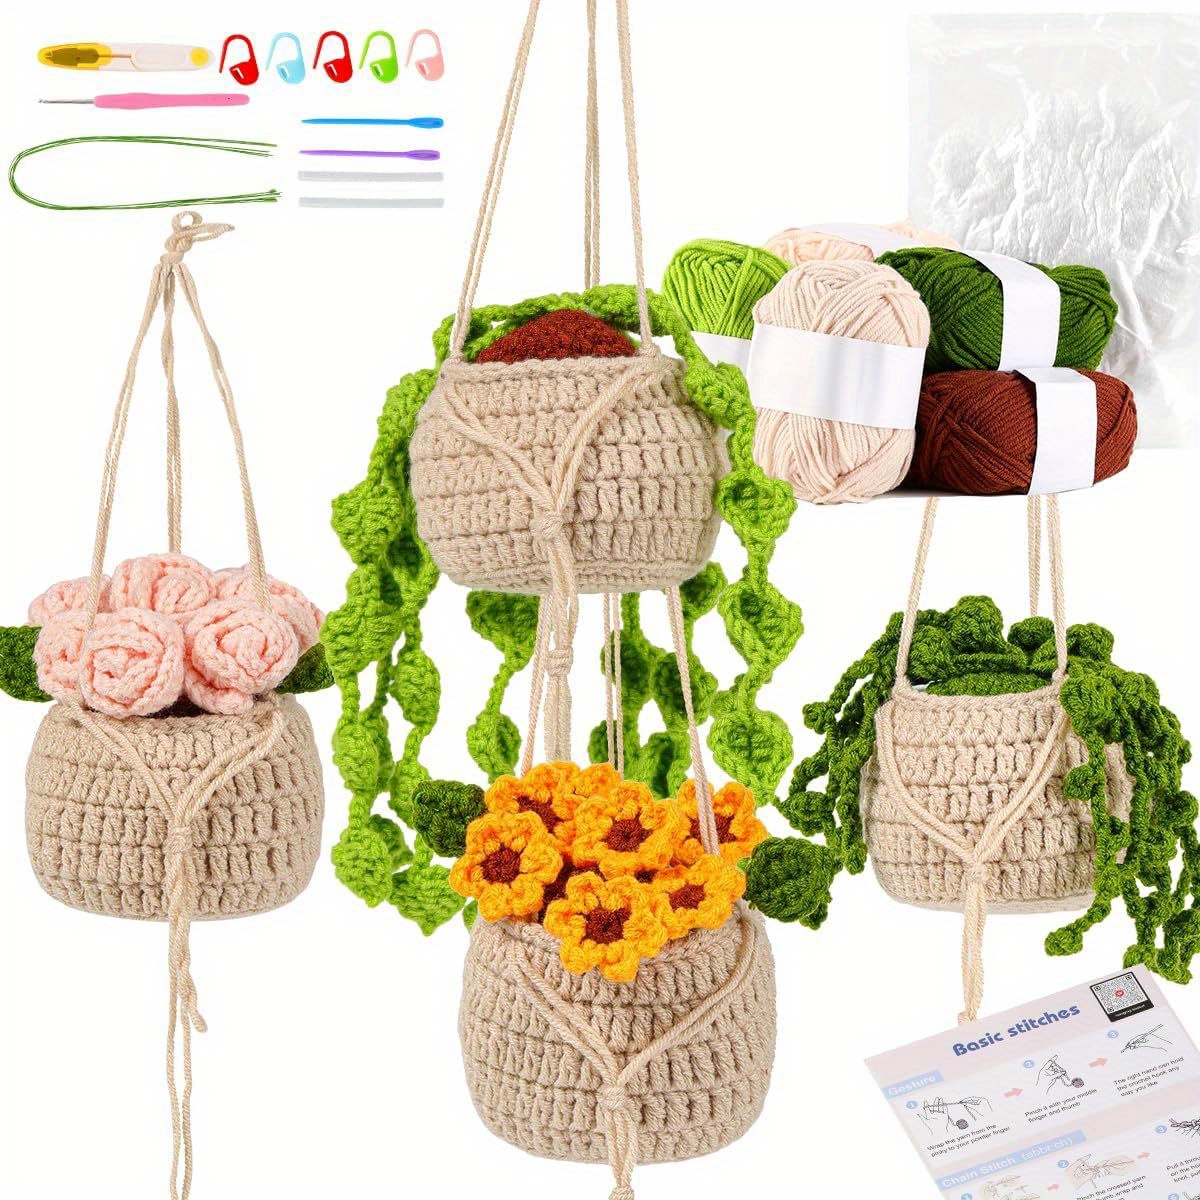 

Crochet Kit | Crochet Kit For Beginners | Beginner Crochet Kit With Step By Step Video Lessons | 4 Pc Cute Potted Plants Crochet Kit With Complete Crochet Accessories